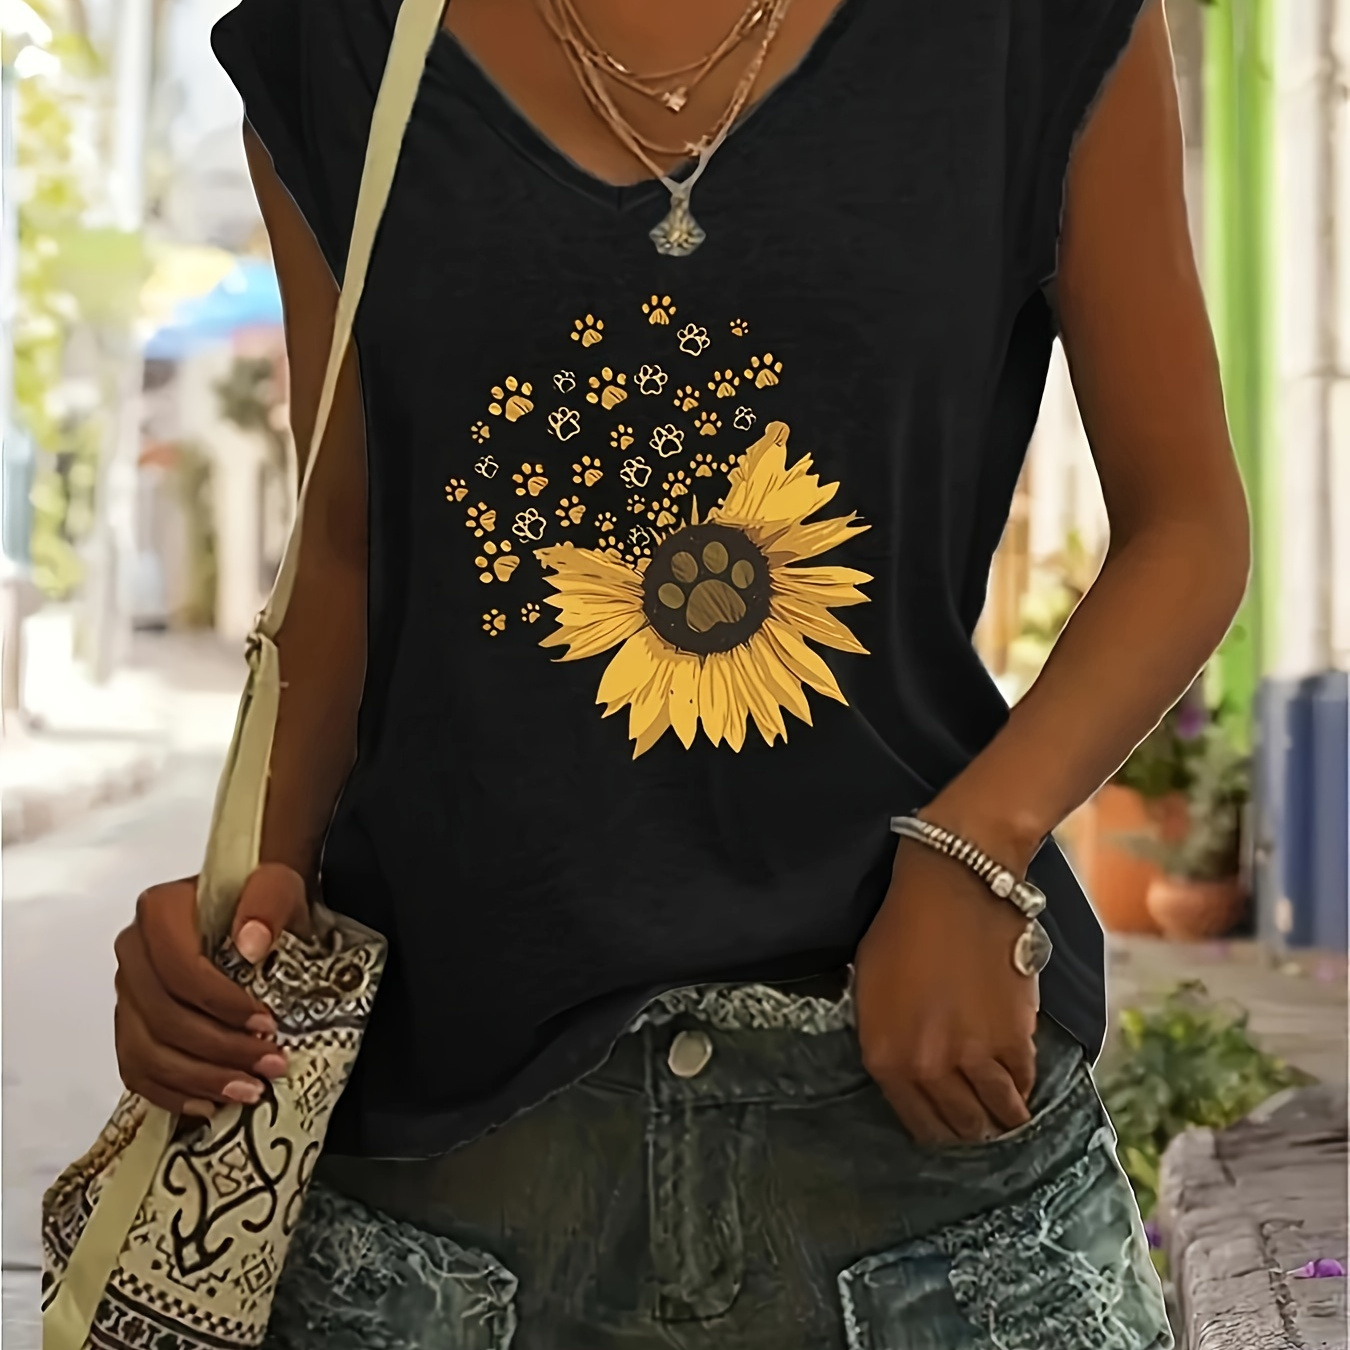 

Sunflower & Paw Print Casual T-shirt, Cap Sleeve V-neck Top For Spring & Summer, Women's Clothing